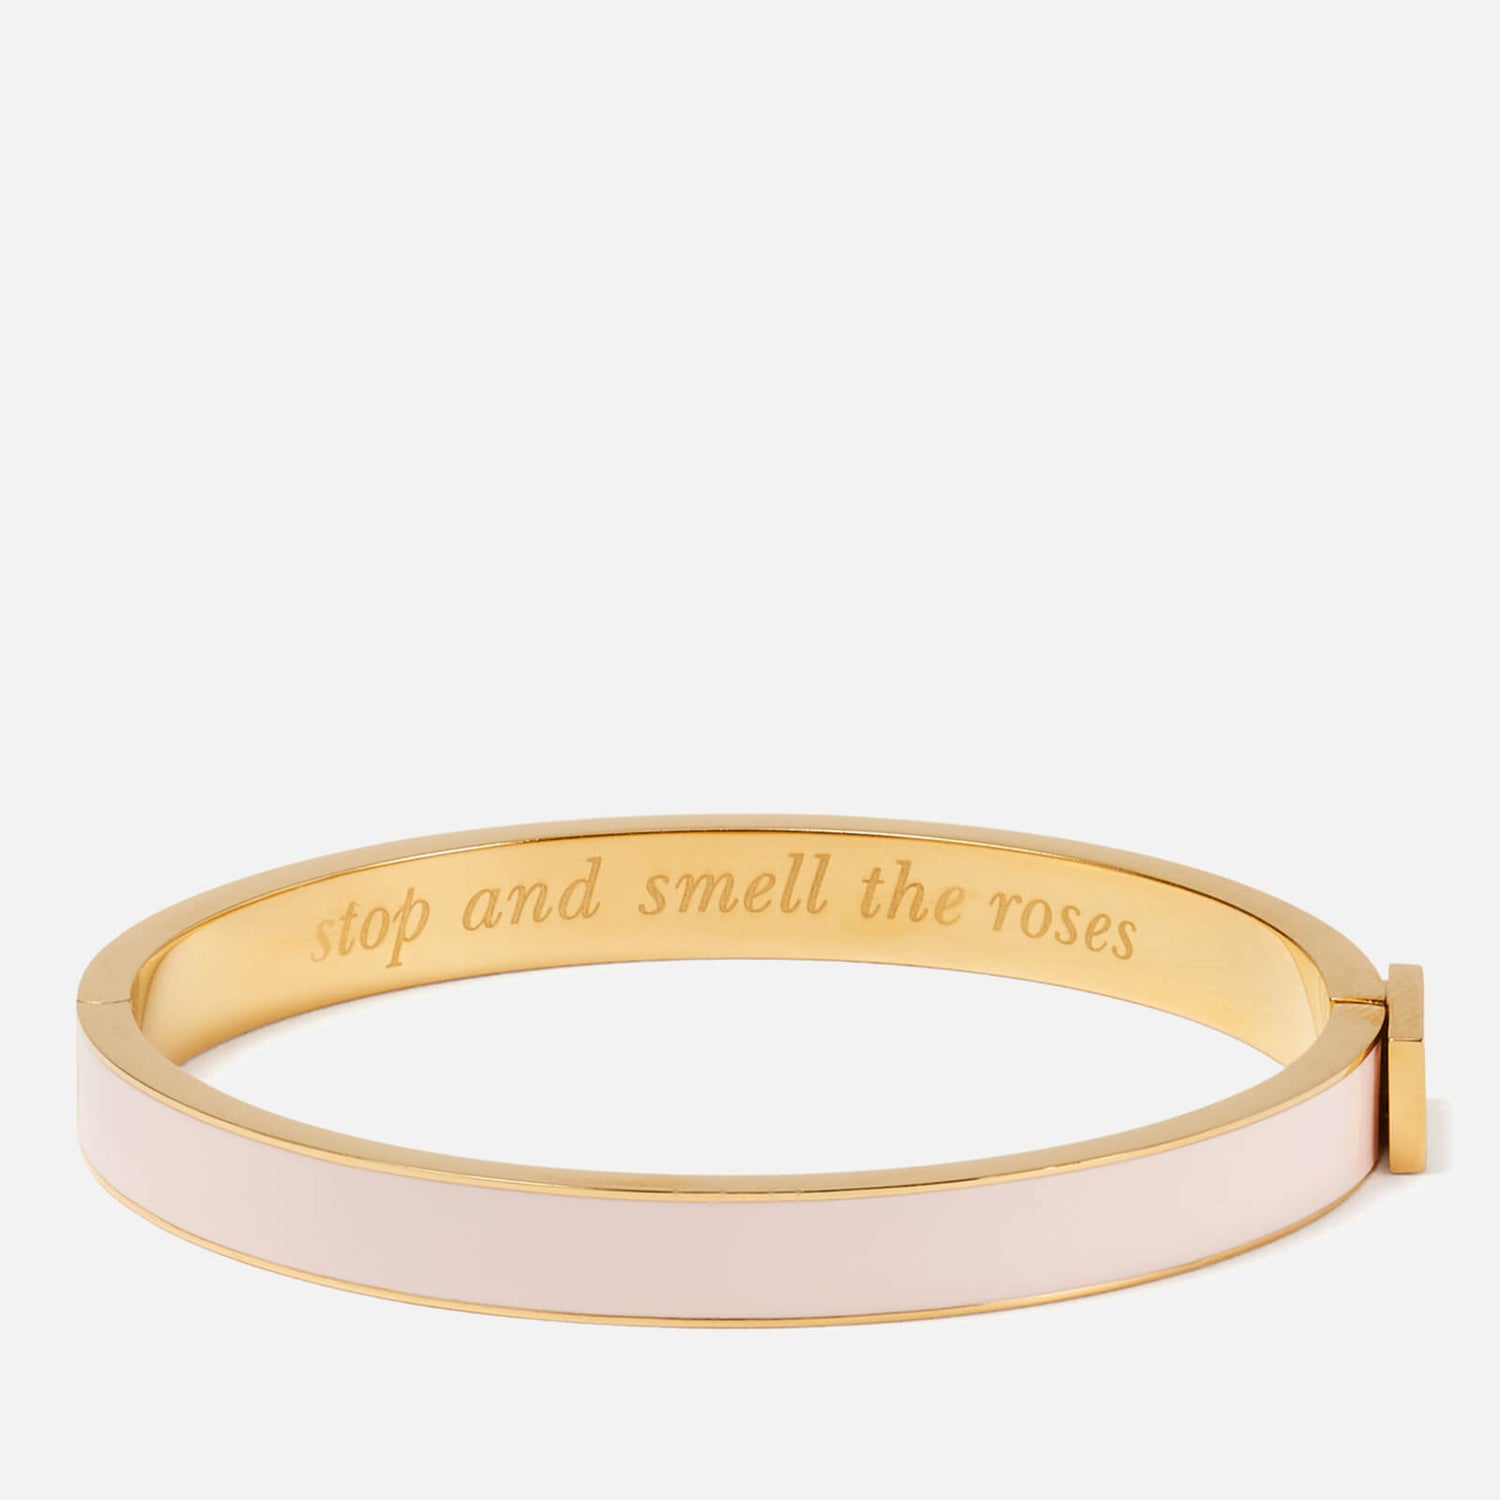 Kate Spade New York Idiom 'Stop And Smell The Roses' Gold-Plated Bangles